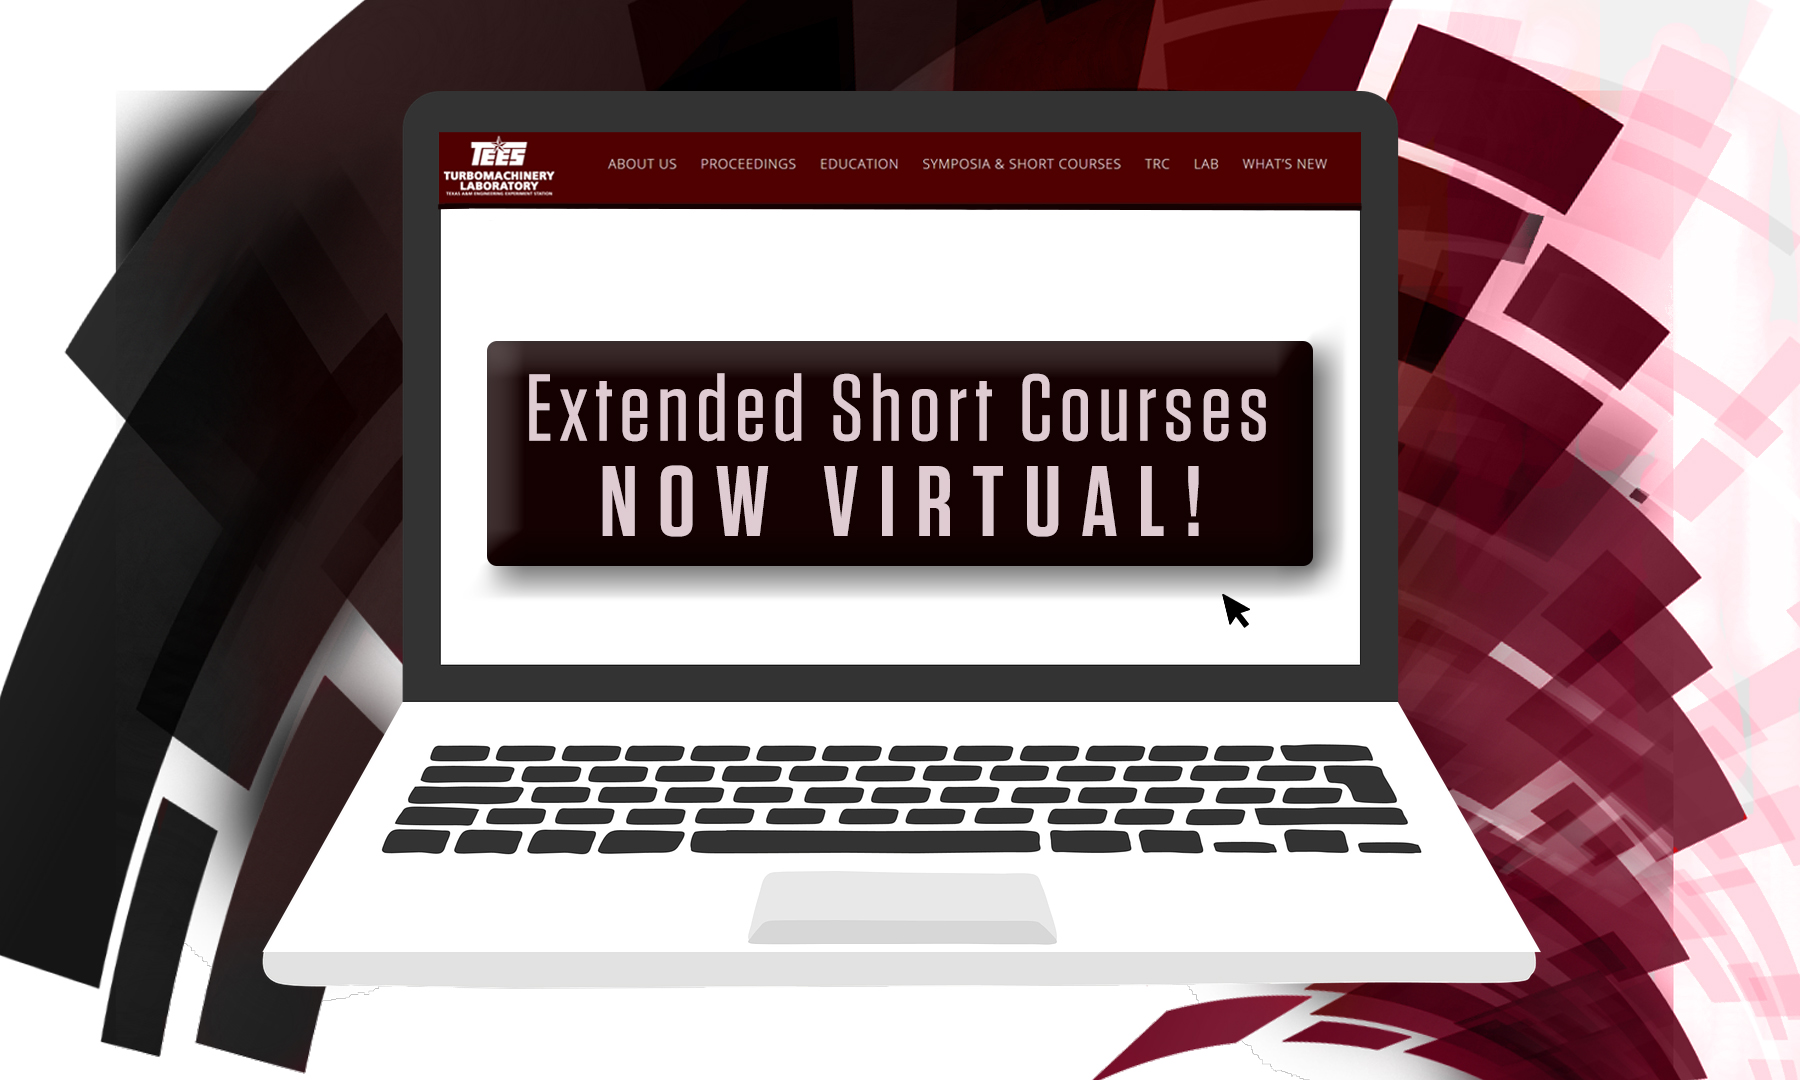 A computer graphic that reads "Extended Short Courses NOW VIRTUAL!"